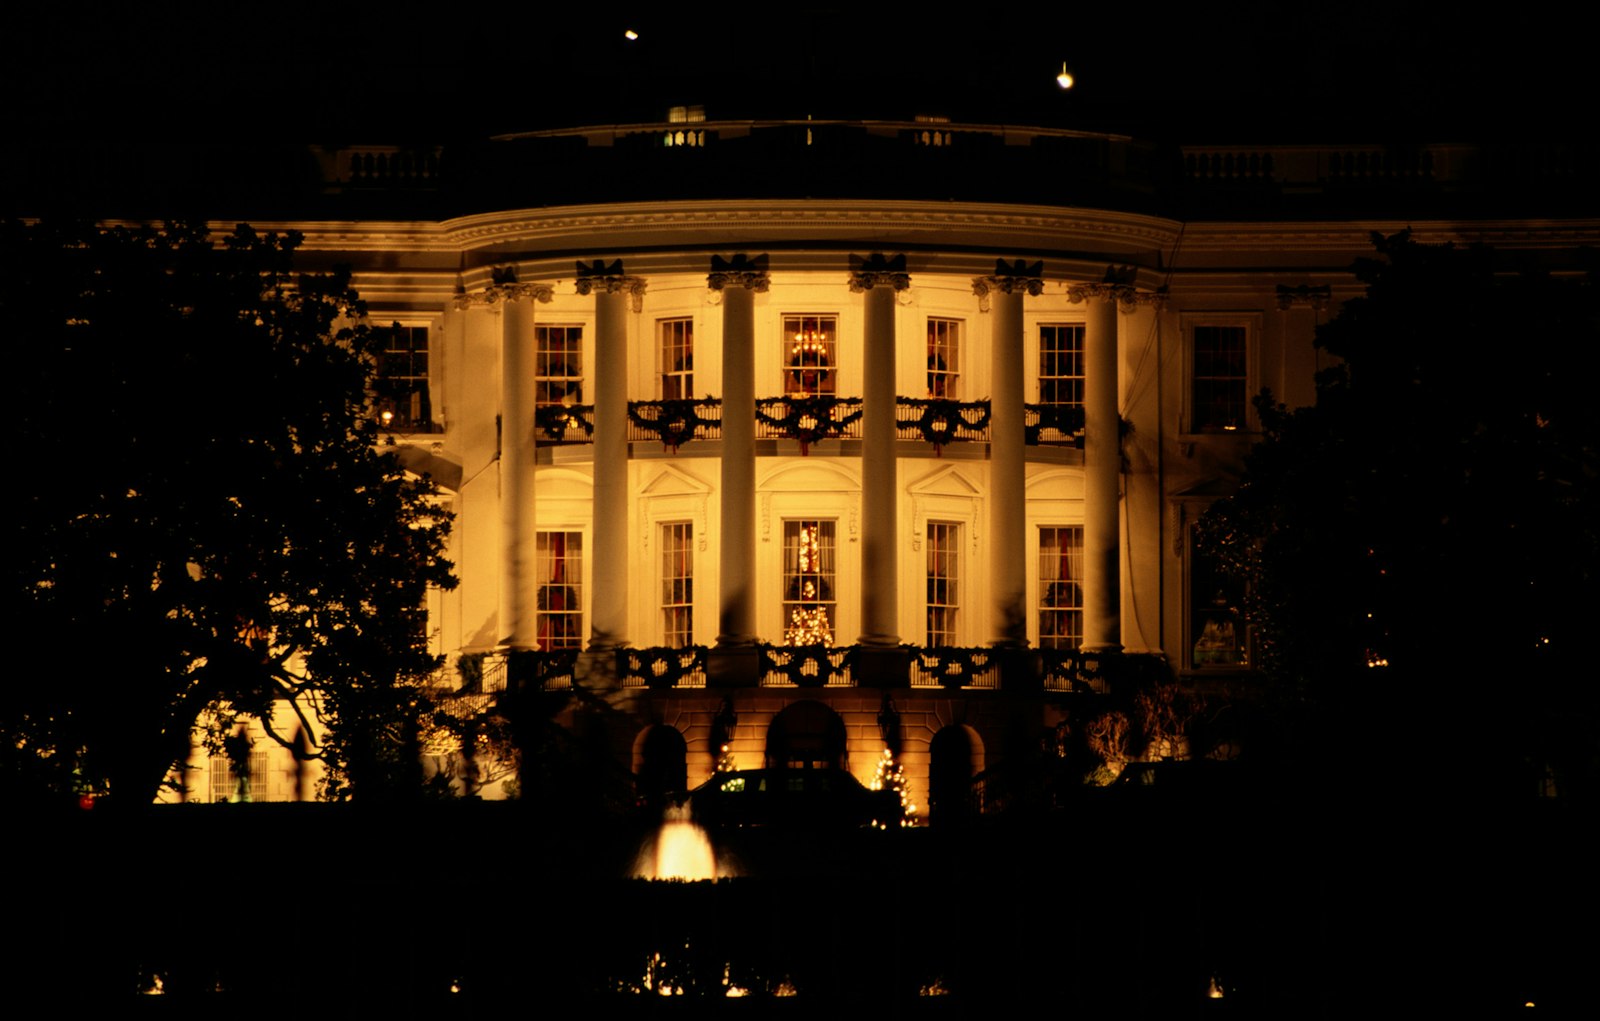 The White House lit up at night